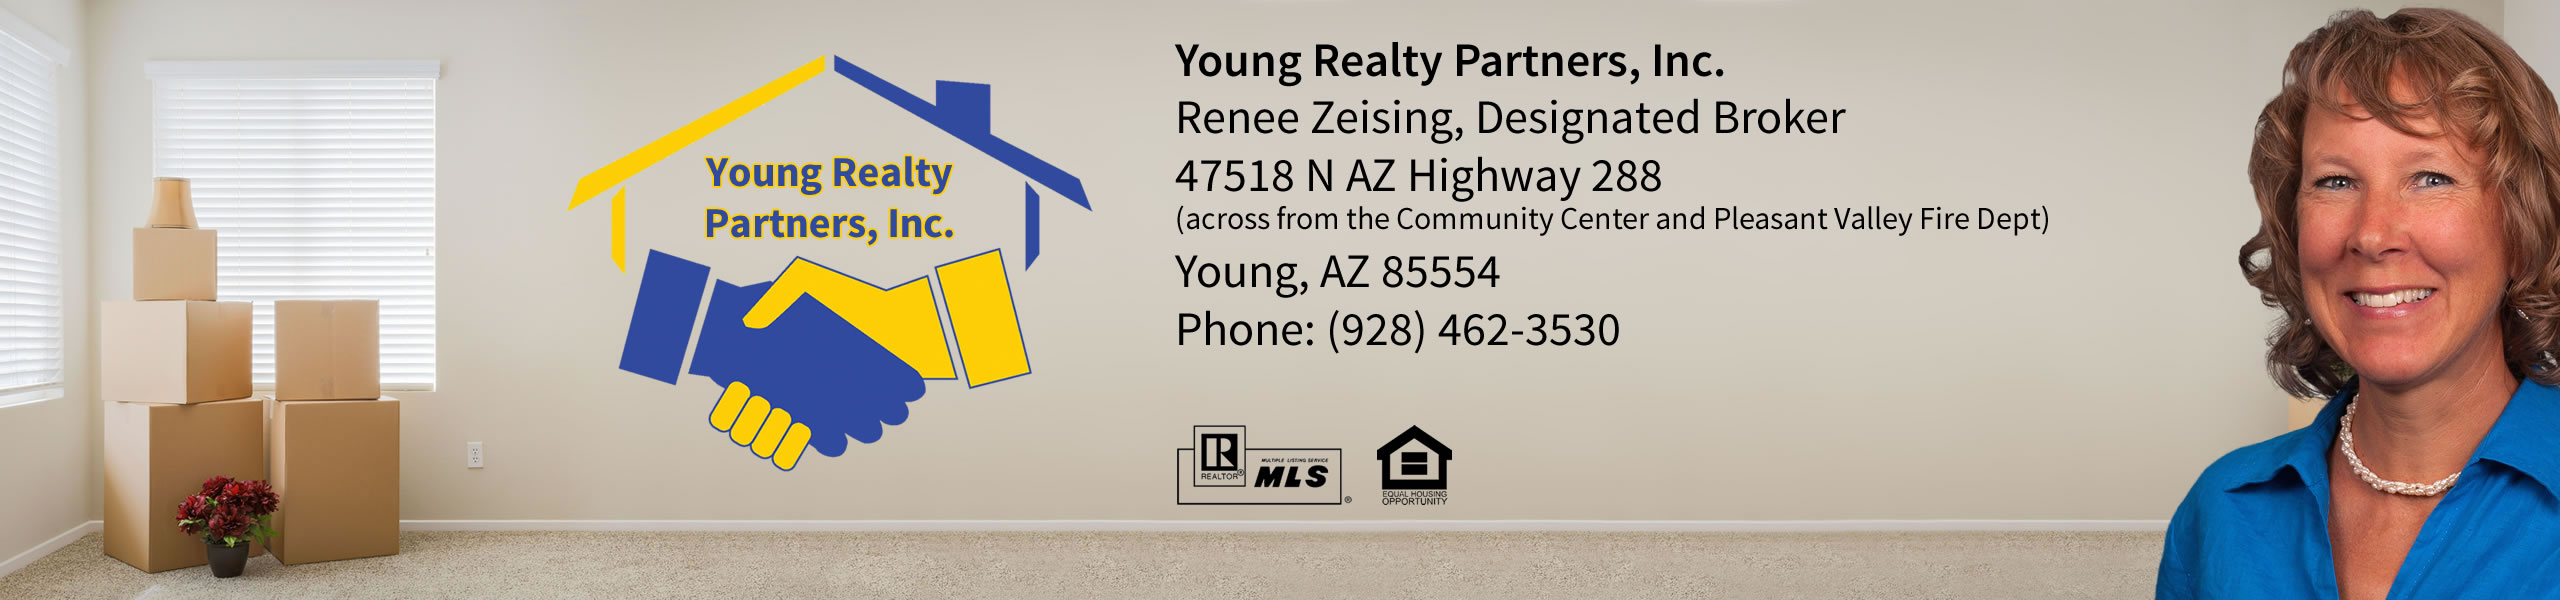 Young Realty